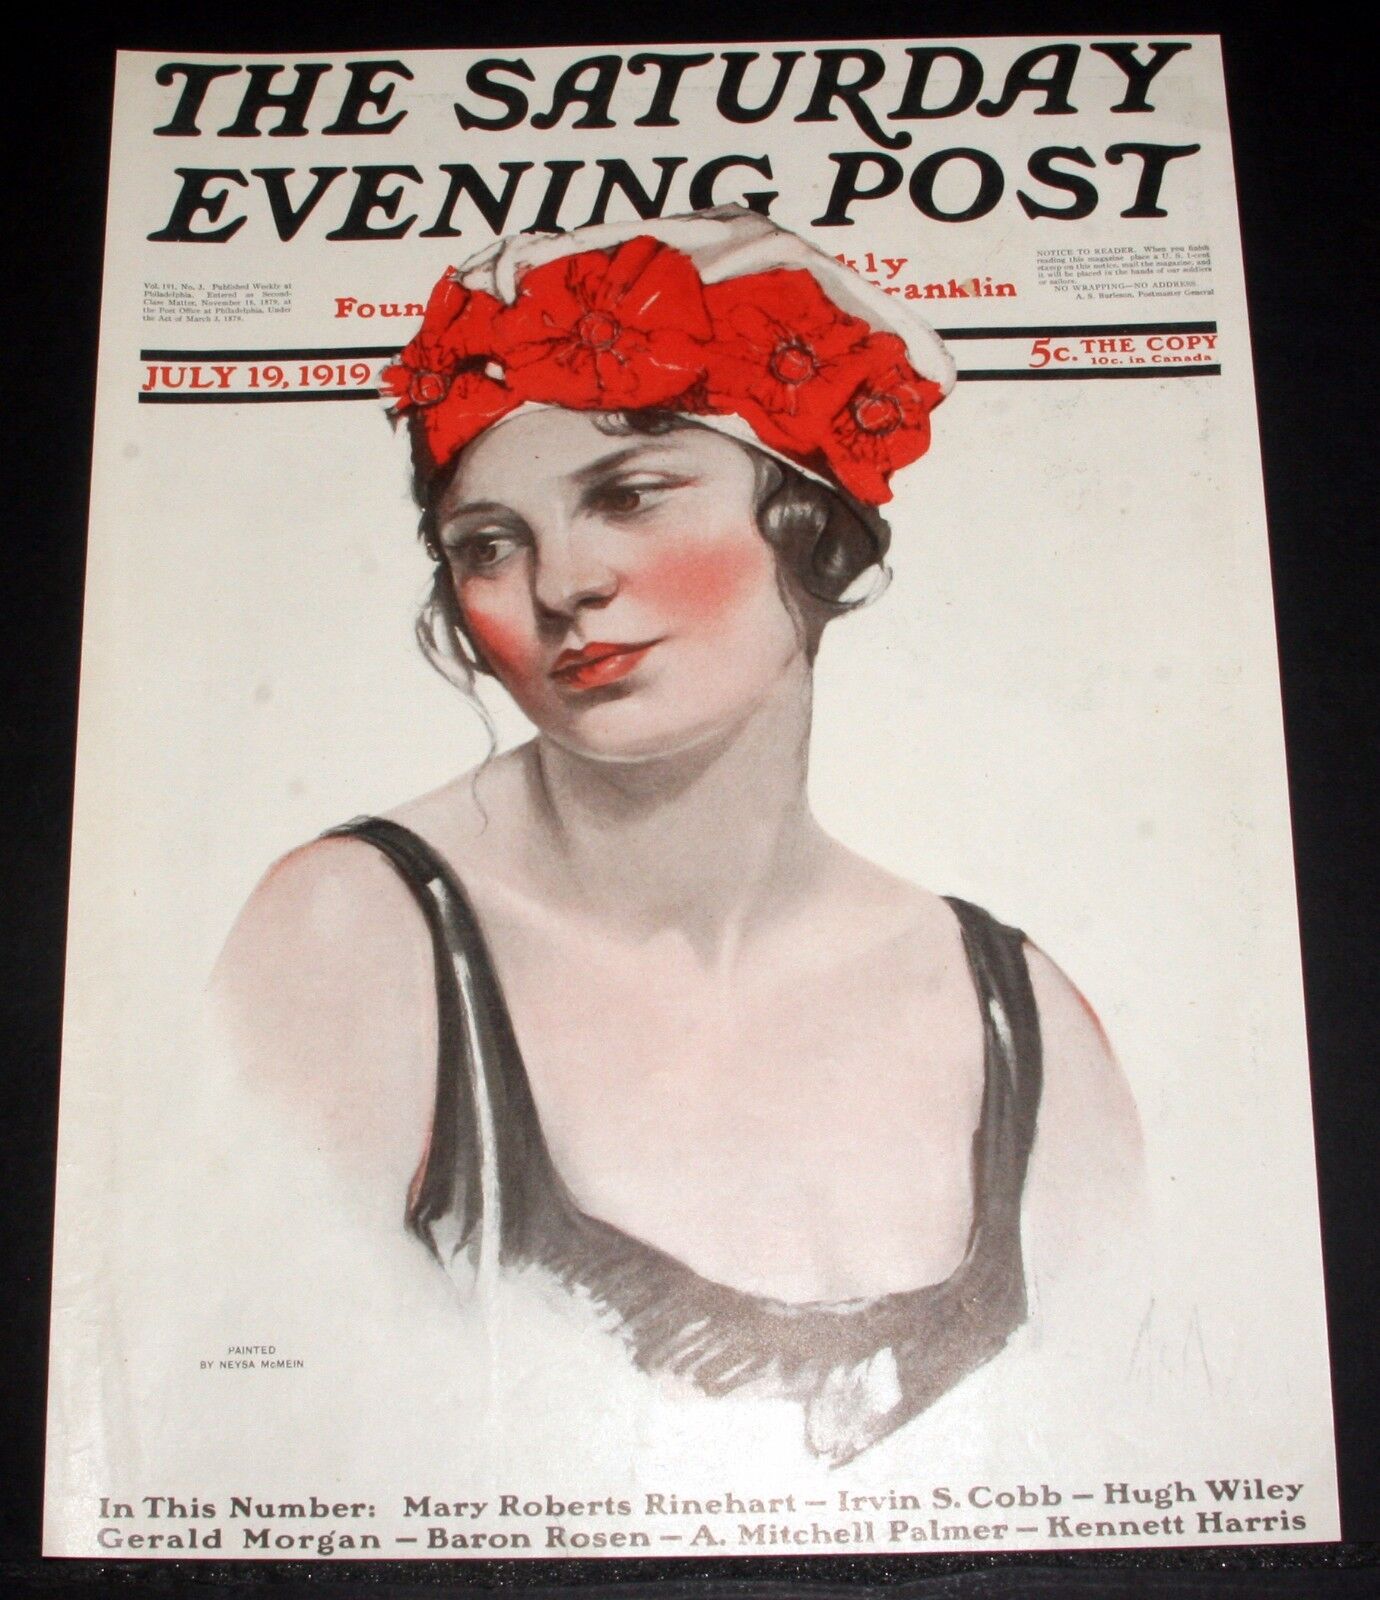 1919, JULY 19, OLD SATURDAY EVENING POST MAGAZINE COVER (ONLY) NEYSA McMEIN ART